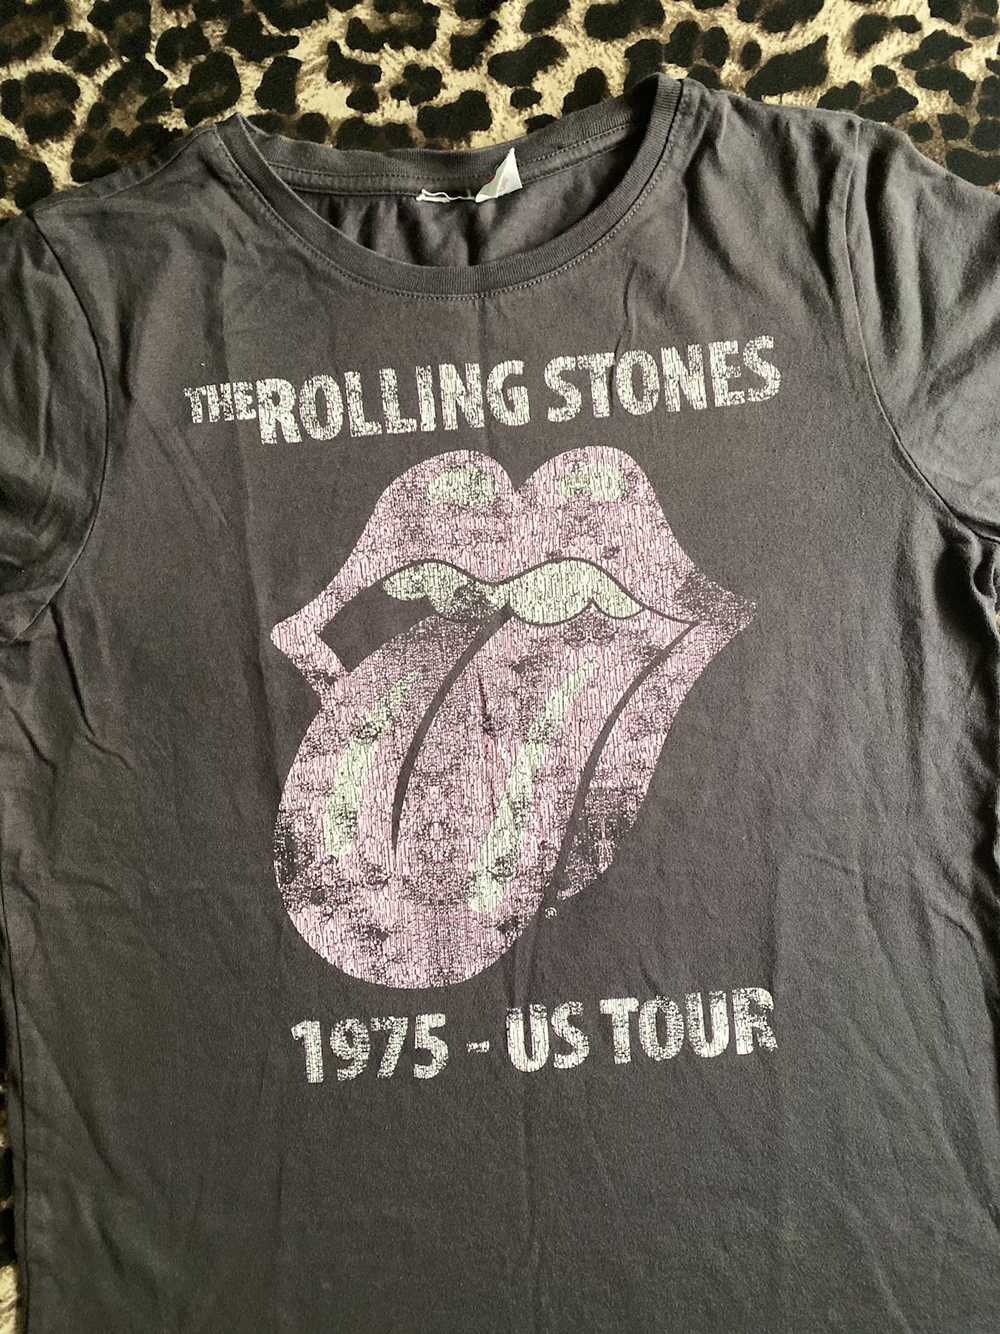 Streetwear × The Rolling Stones t-shirt the rolli… - image 2